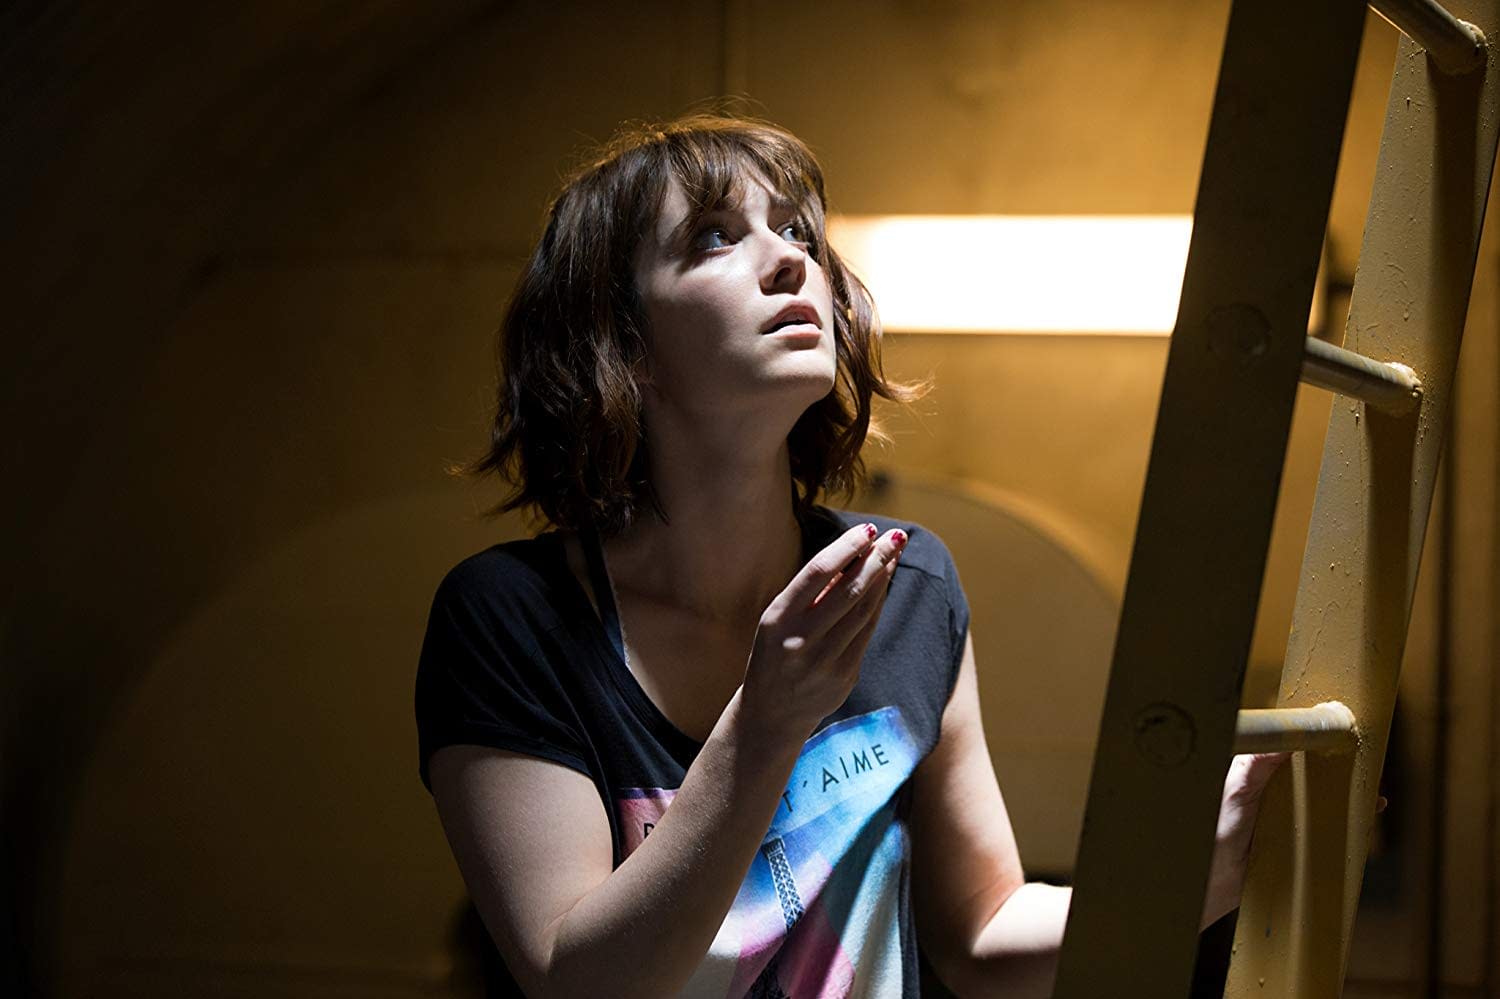 Our Favorite Moments From the Cloverfield Franchise (So Far)